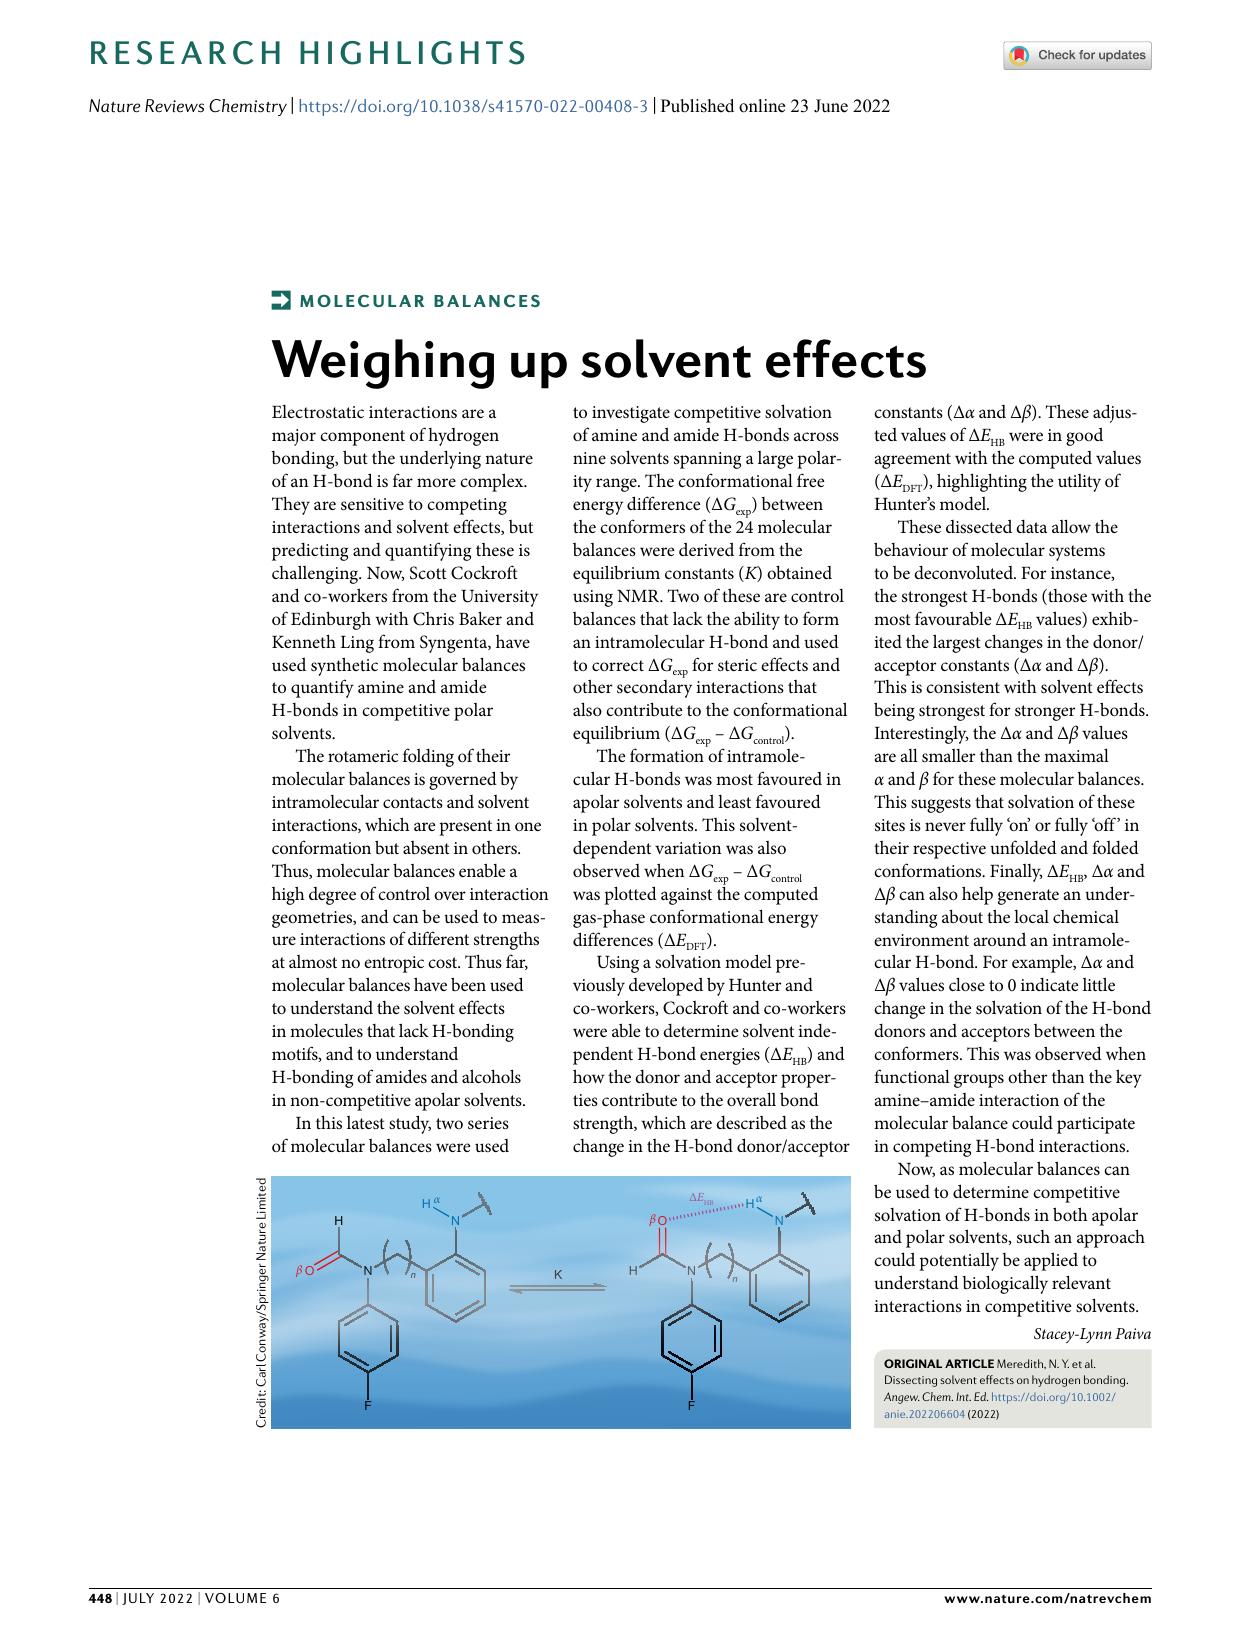 Weighing up solvent effects by Stacey-Lynn Paiva